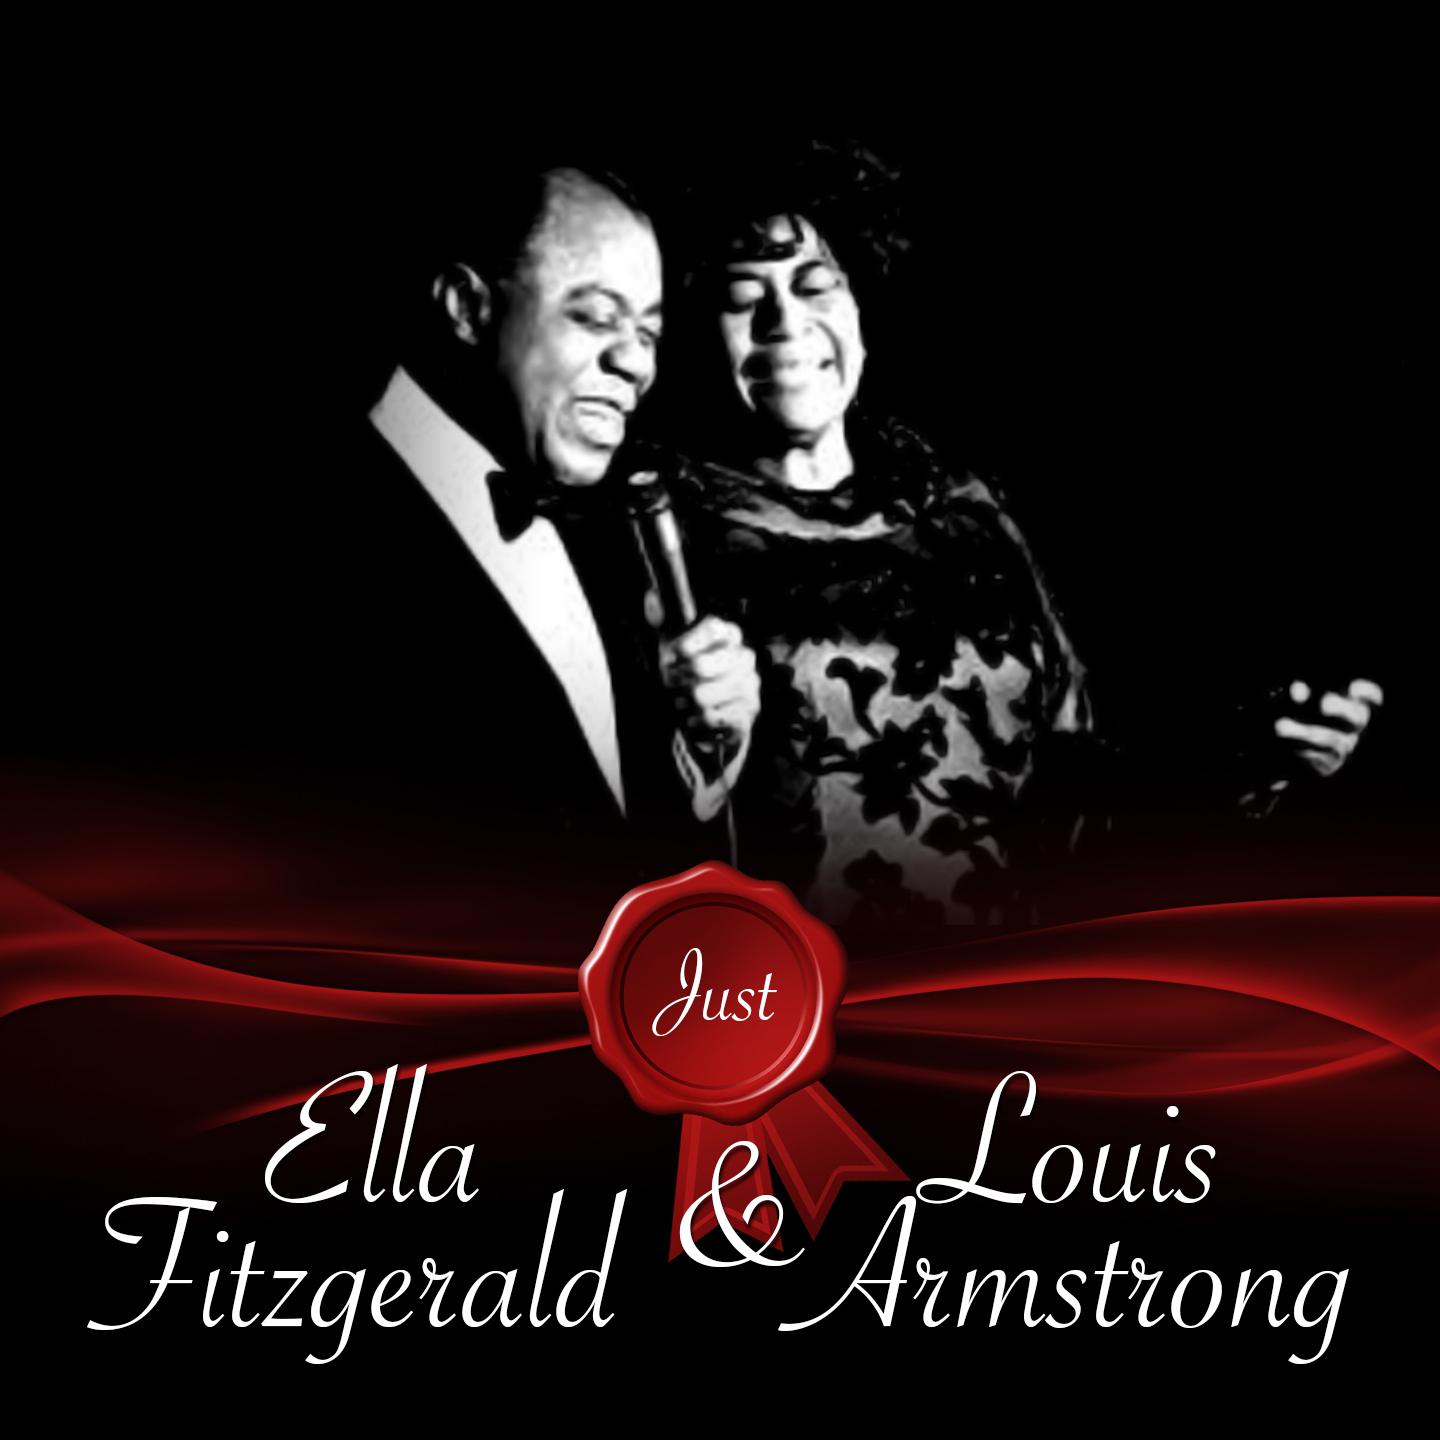 Just / Ella Fitzgerald And Louis Armstrong